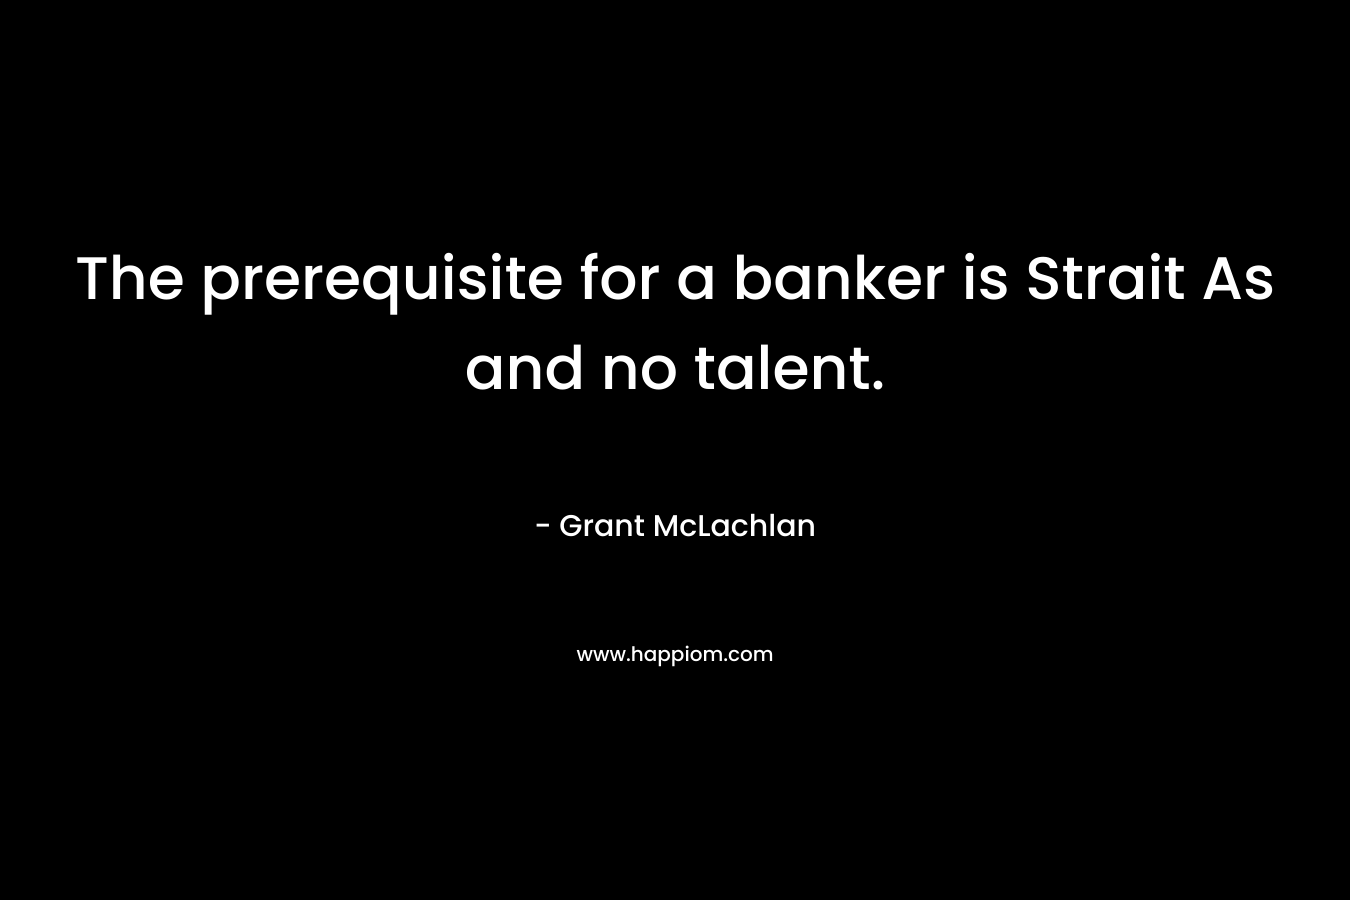 The prerequisite for a banker is Strait As and no talent.